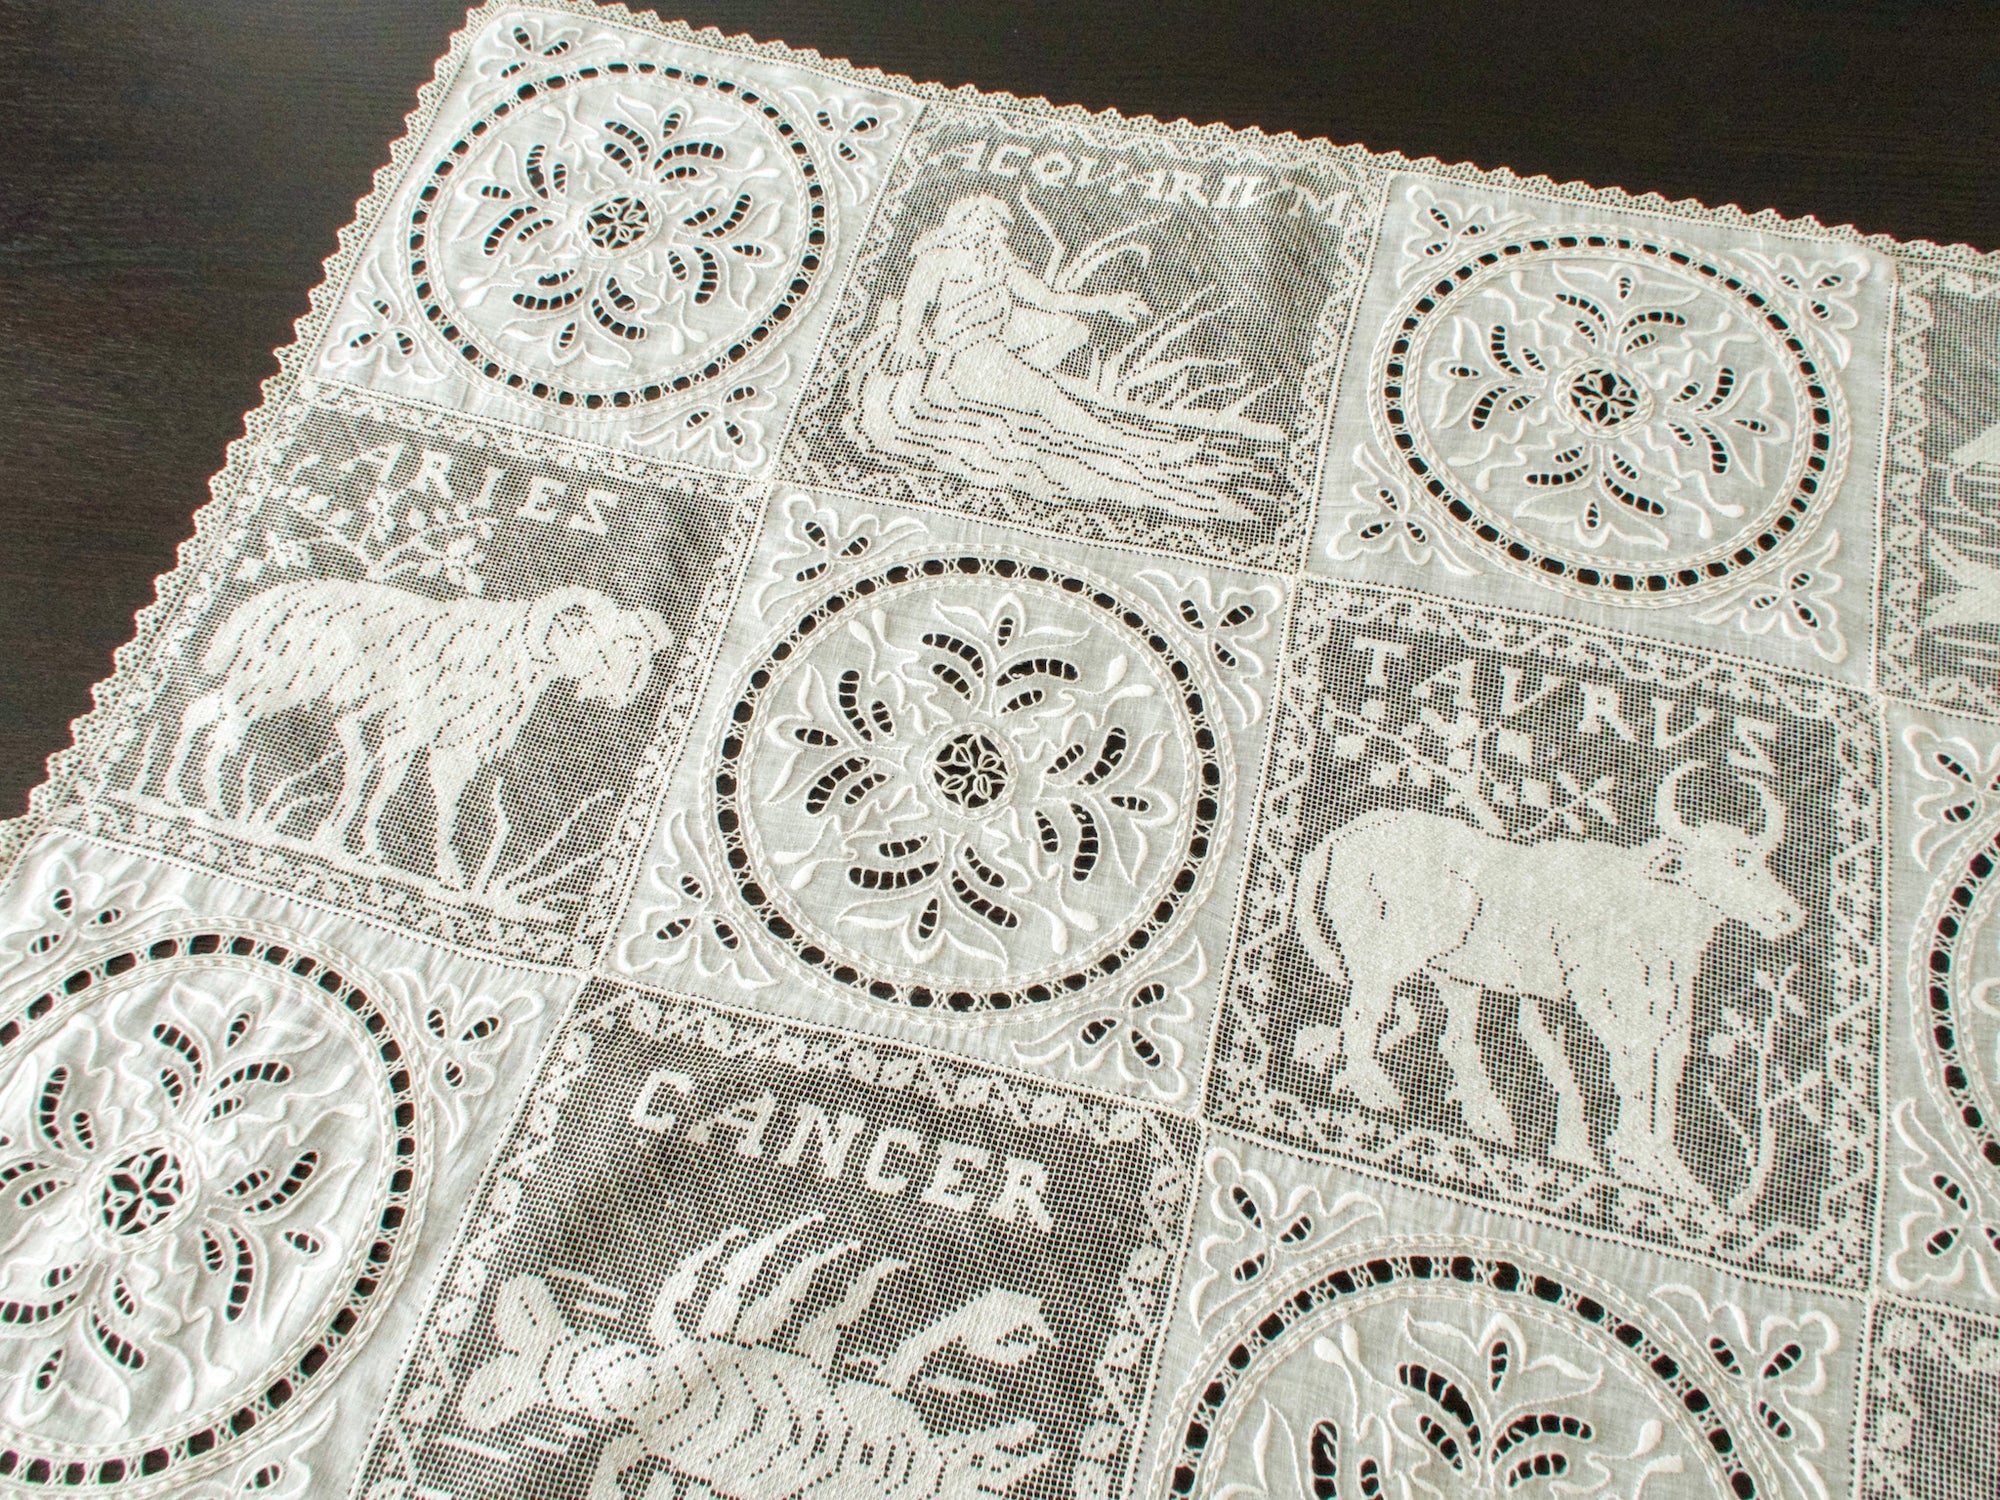 Zodiac Antique French Mixed Lace Tablecloth Topper 35x35"